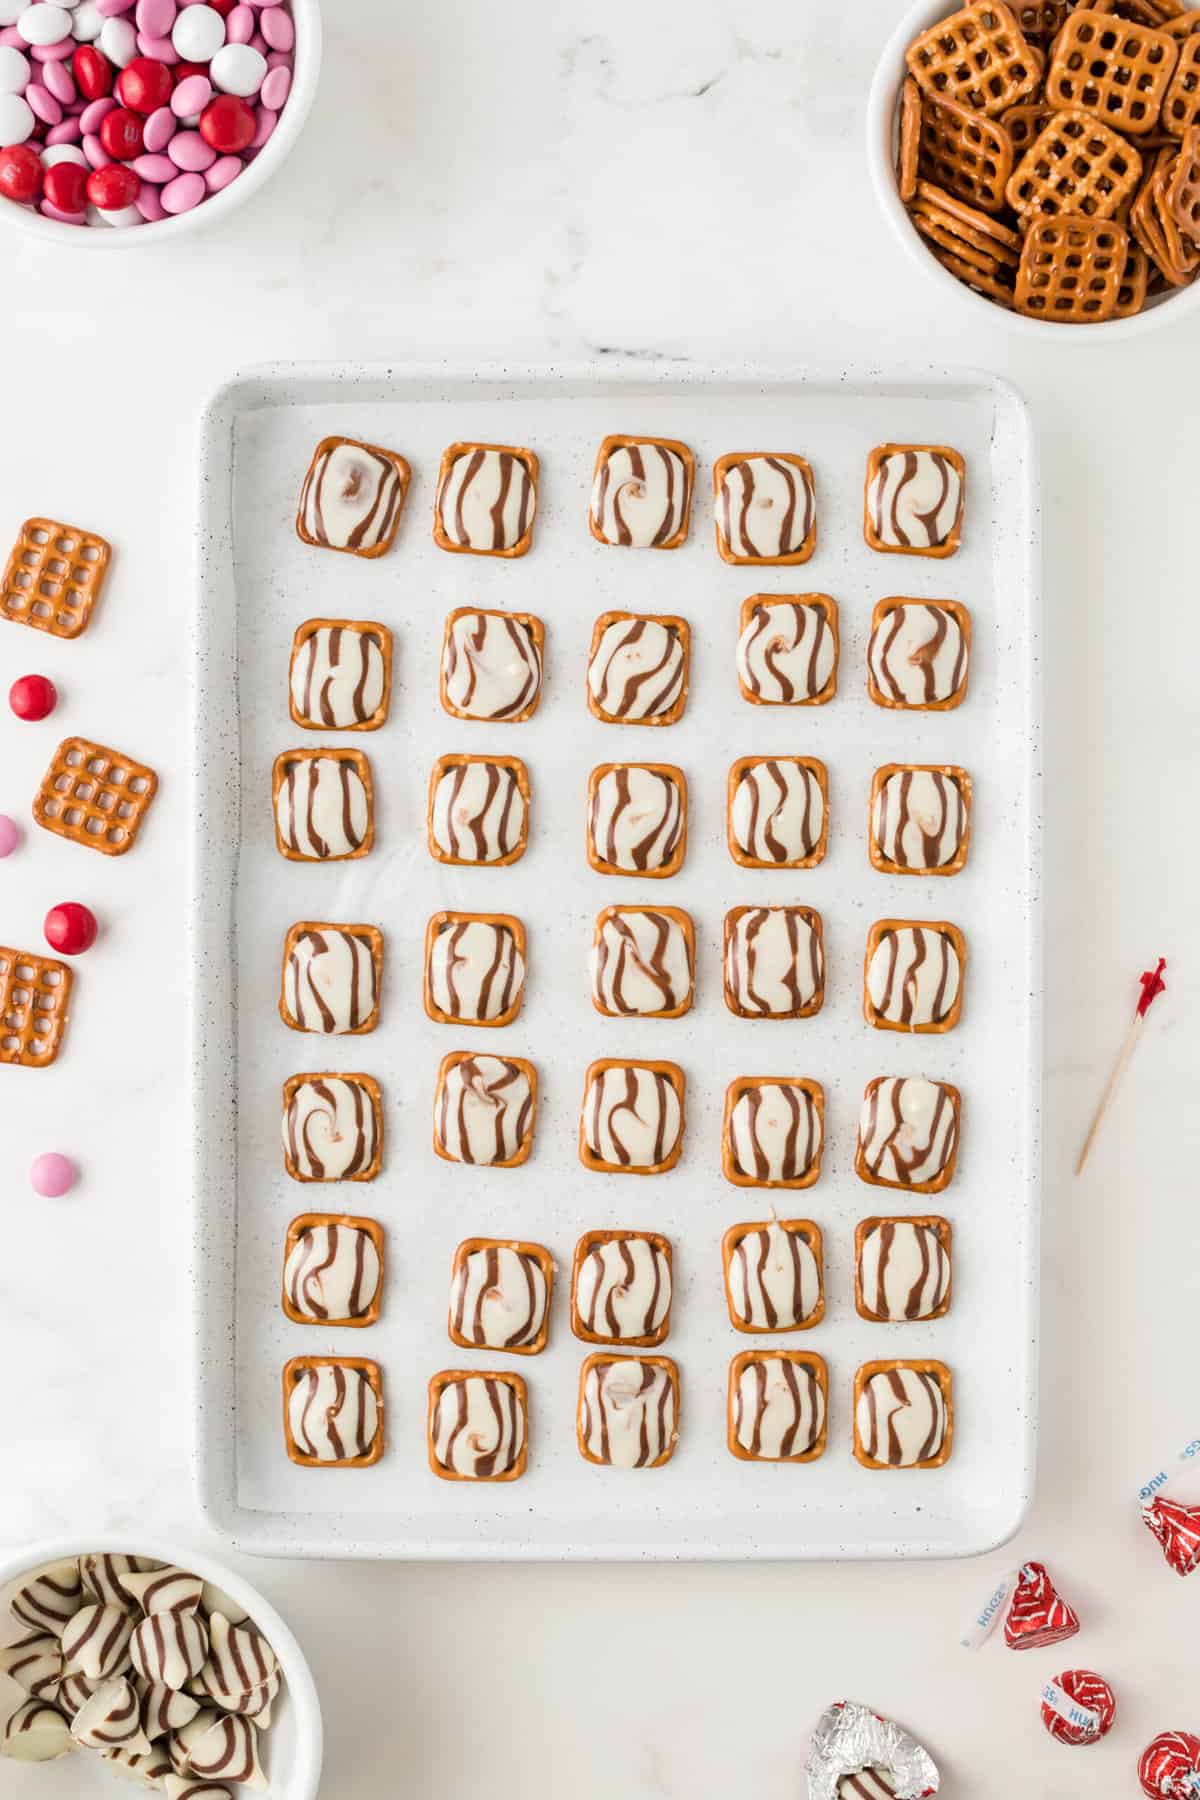 Put the baking sheet in the oven for 3 min 30 seconds or until the hugs are just melted. Remove from the oven and use a toothpick to spread the hug atop of the pretzel.